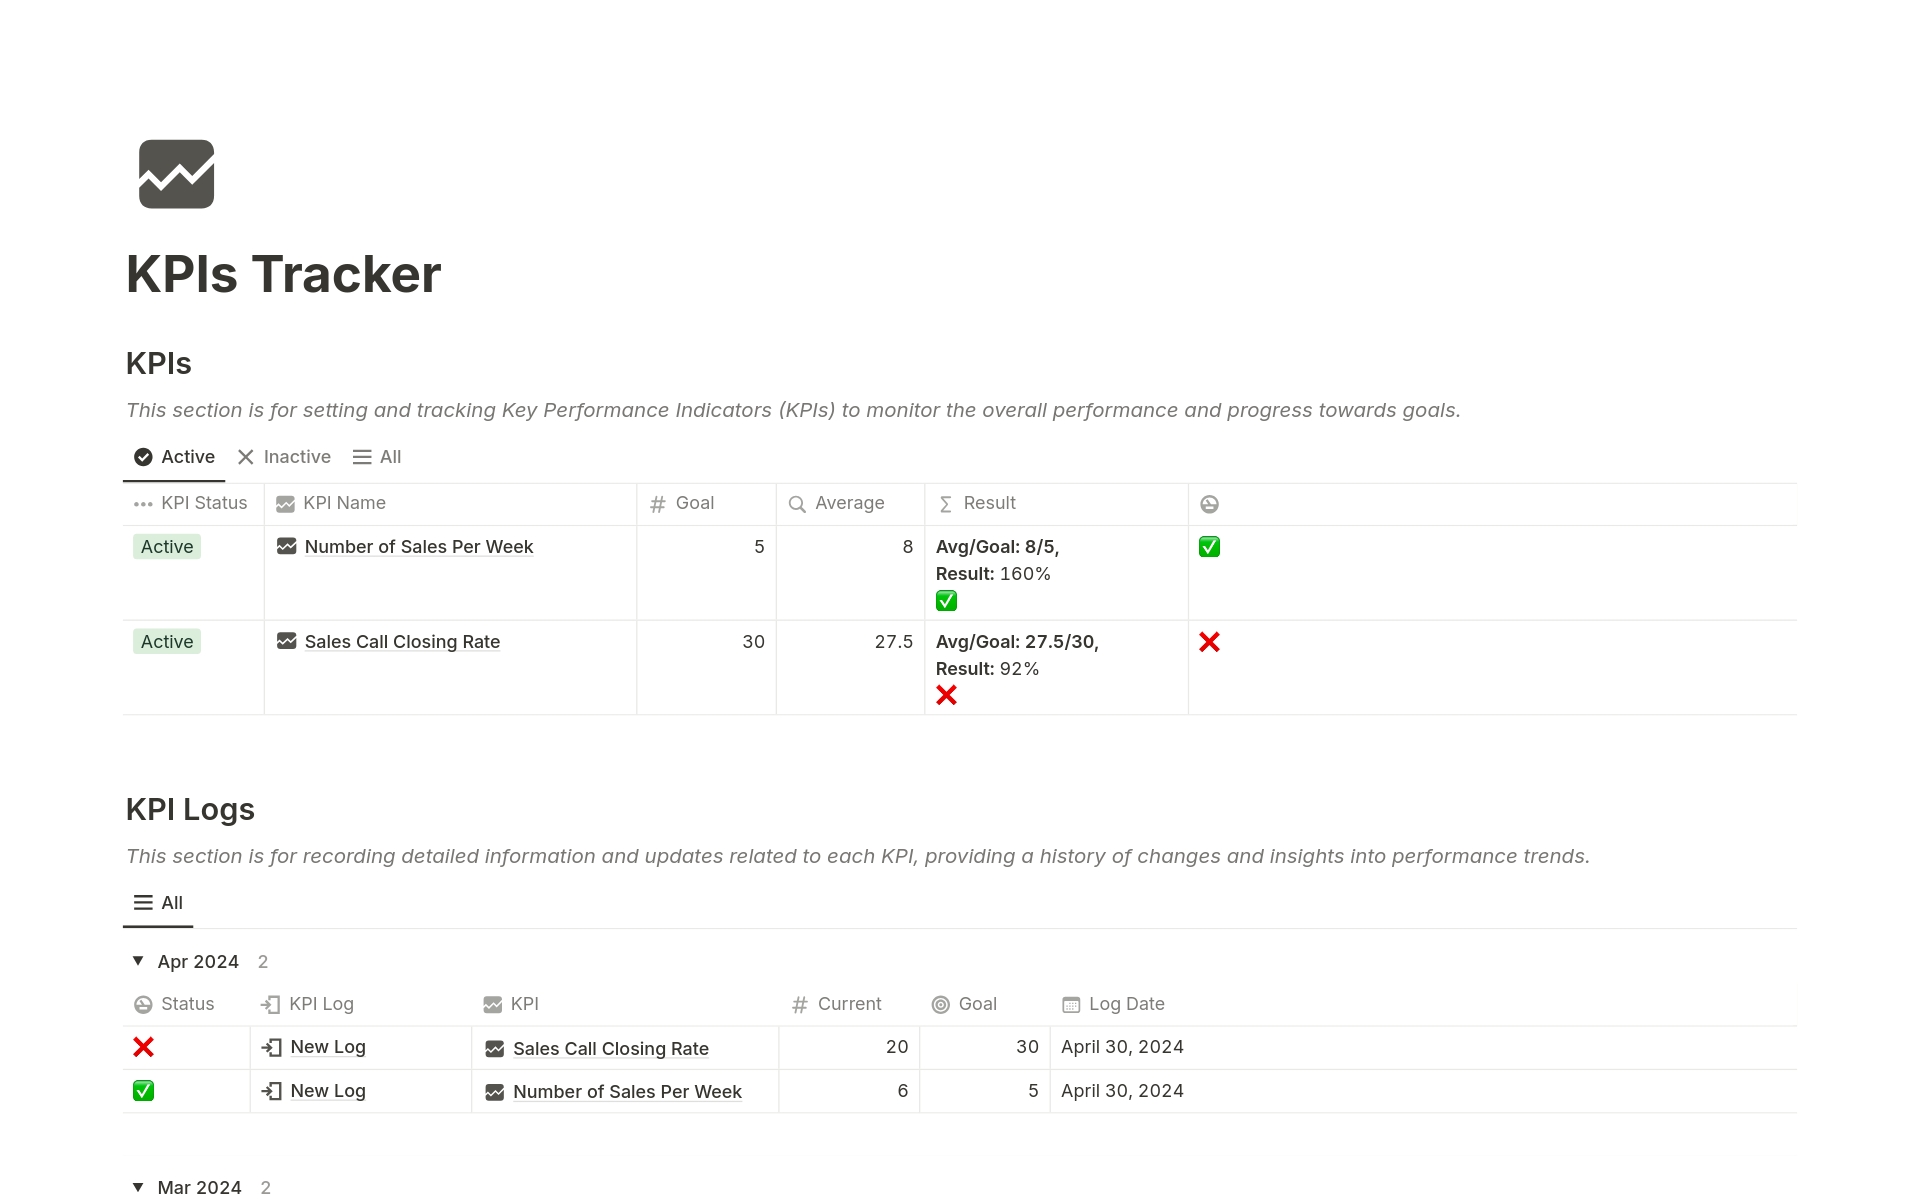 This KPIs Tracker simplifies monitoring your Key Performance Indicators (KPIs) by providing dedicated sections for setting goals and logging progress updates.